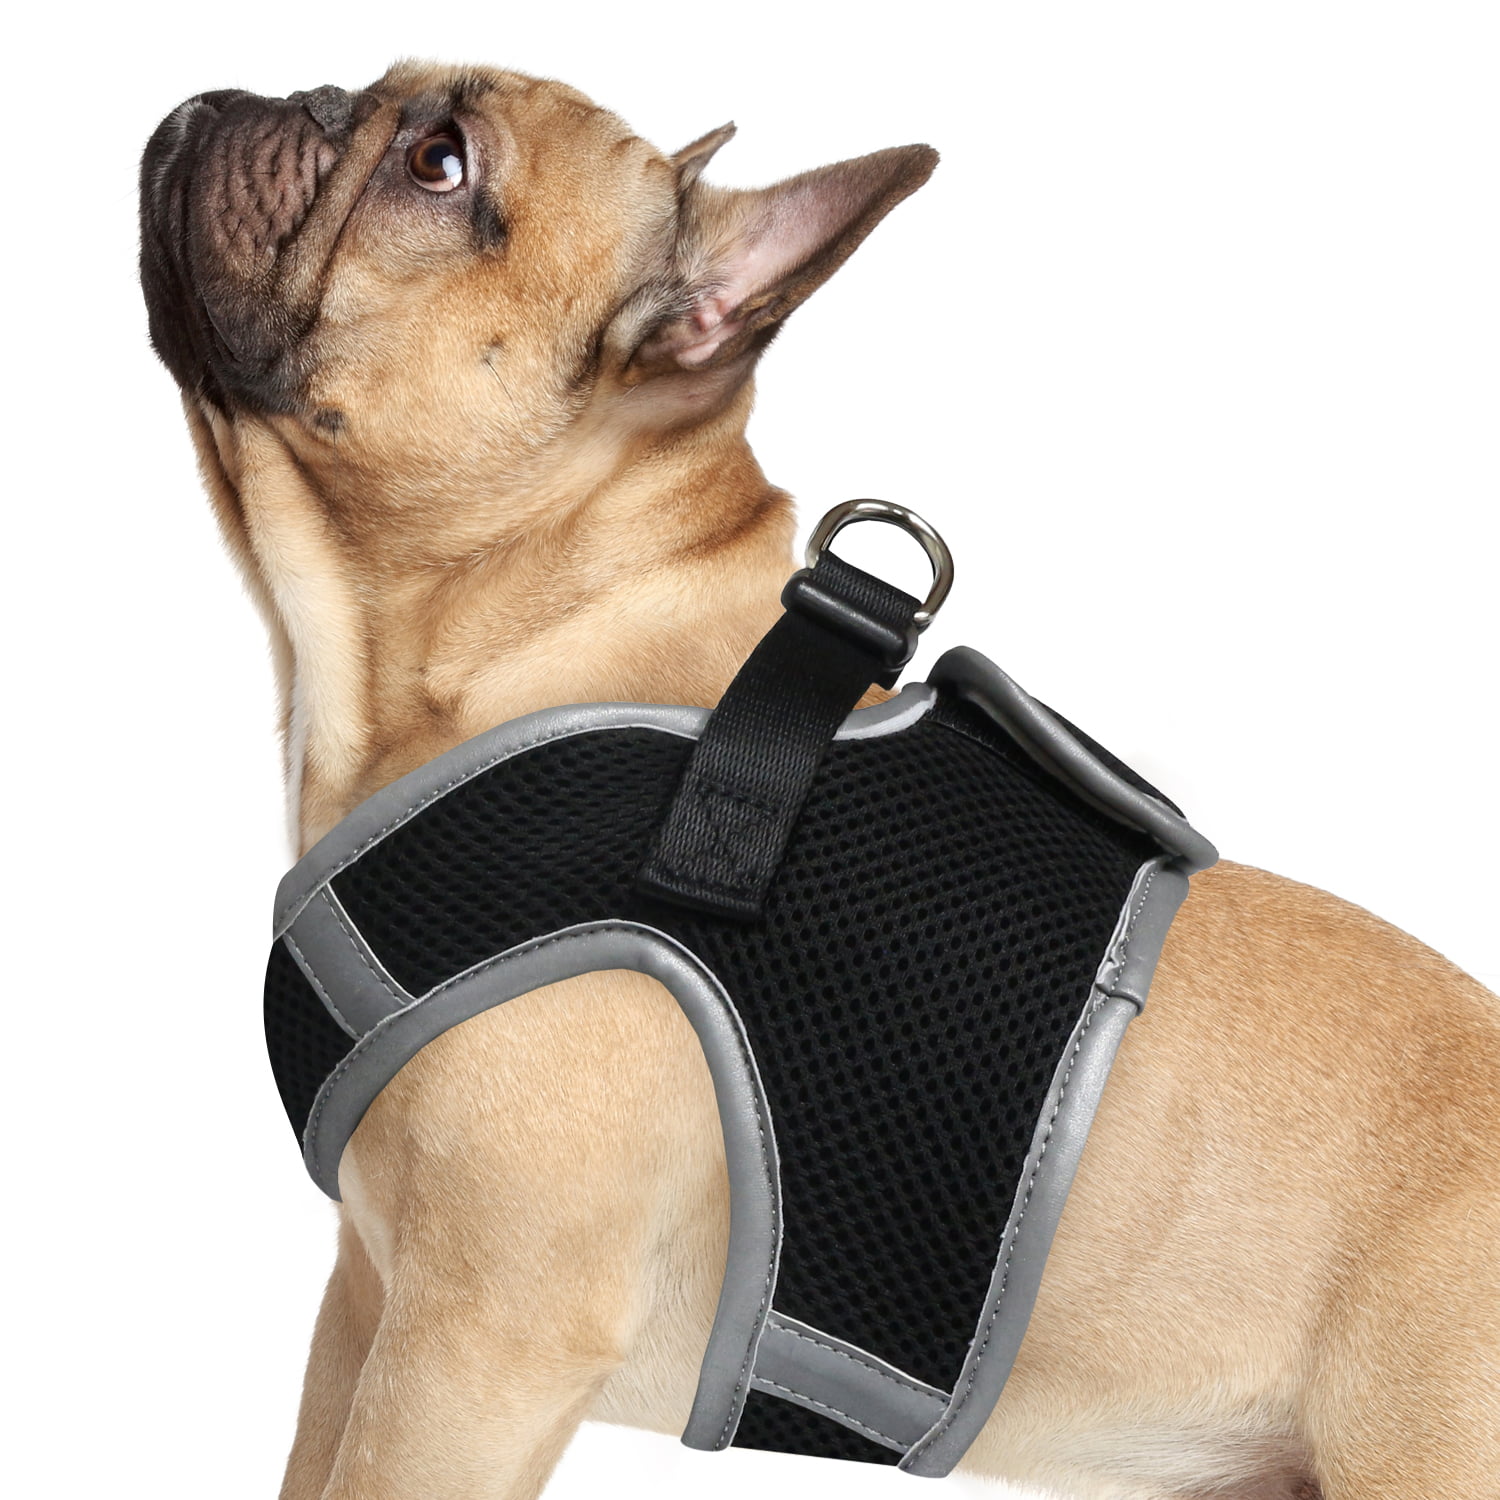 Wealer Dog Harness No-Pull Adjustable,Dog Vest with Training Handle Best Reflective Waterproof Material,Dog Vest Harness All Weather Breathable Mesh for Small Medium Large Dogs 